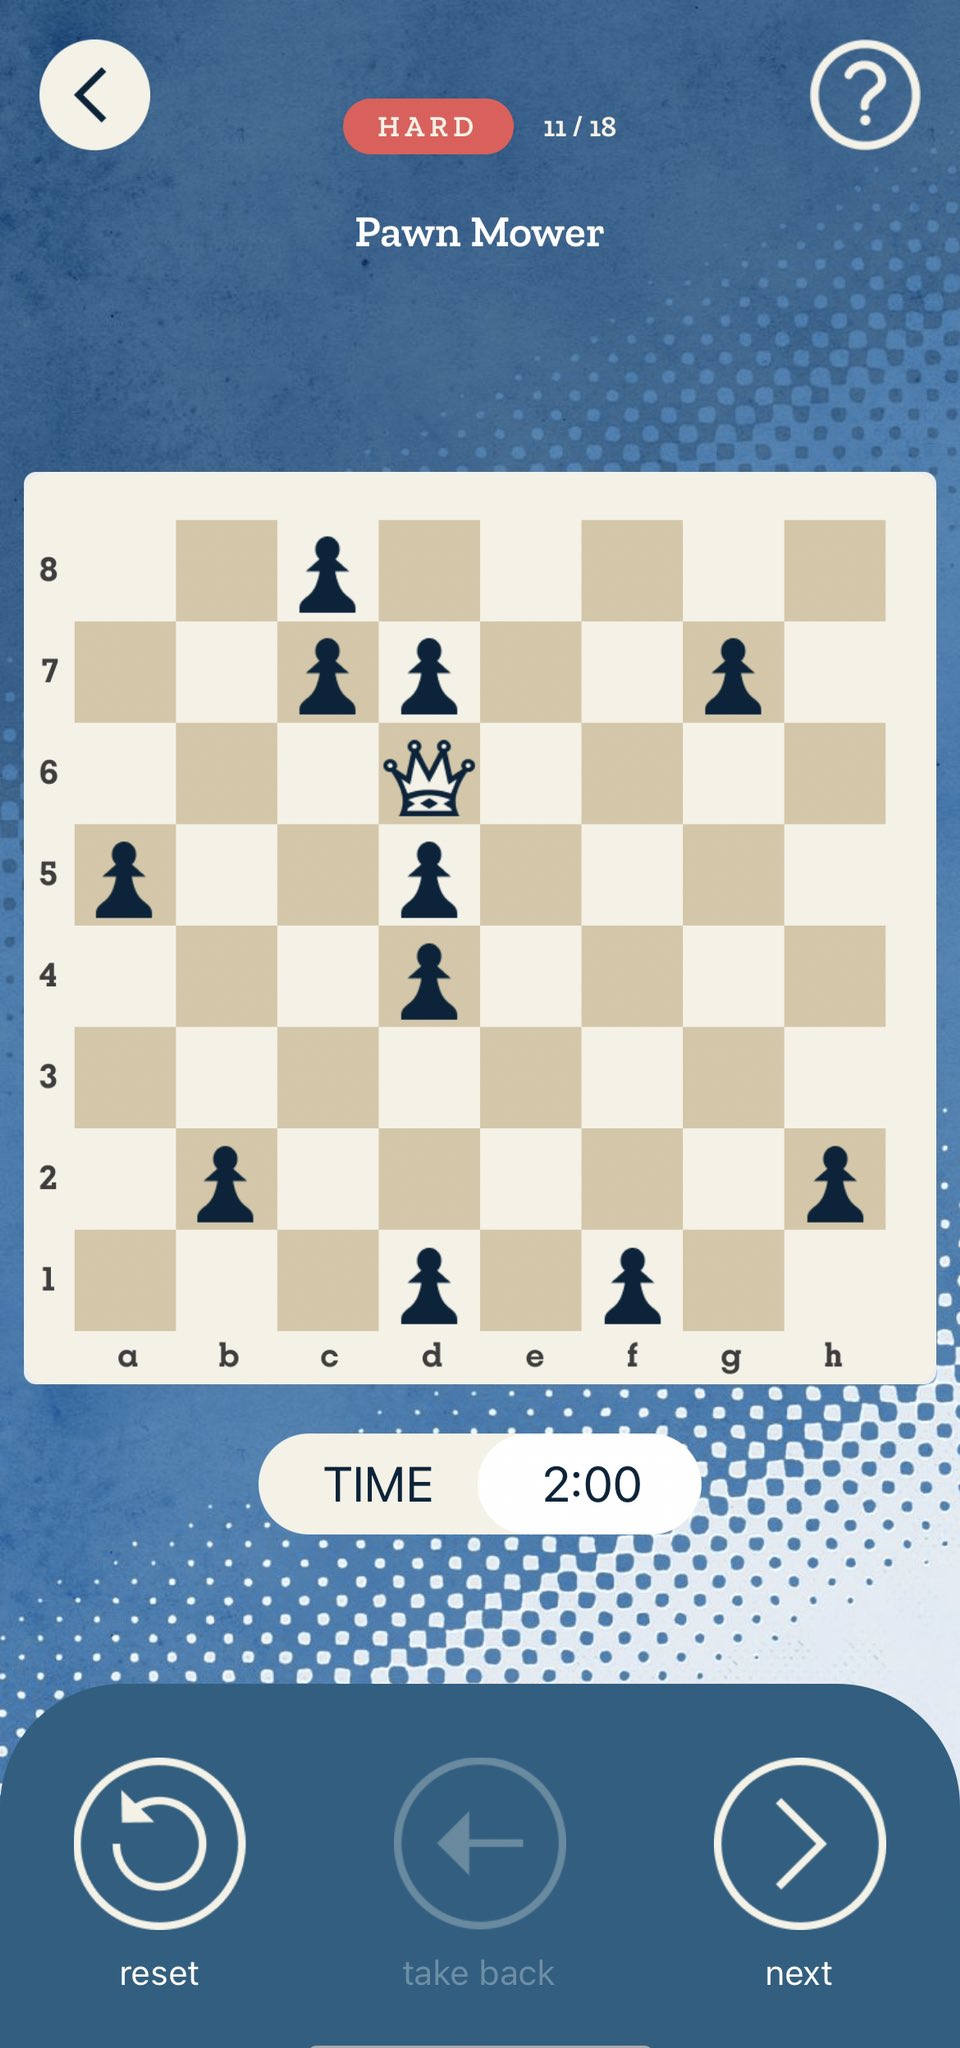 Maurice Ashley on X: Visualization training: How can the queen capture all  11 pawns in exactly 11 moves? The pawns do not move or protect each other.  (From my app Maurice Ashley